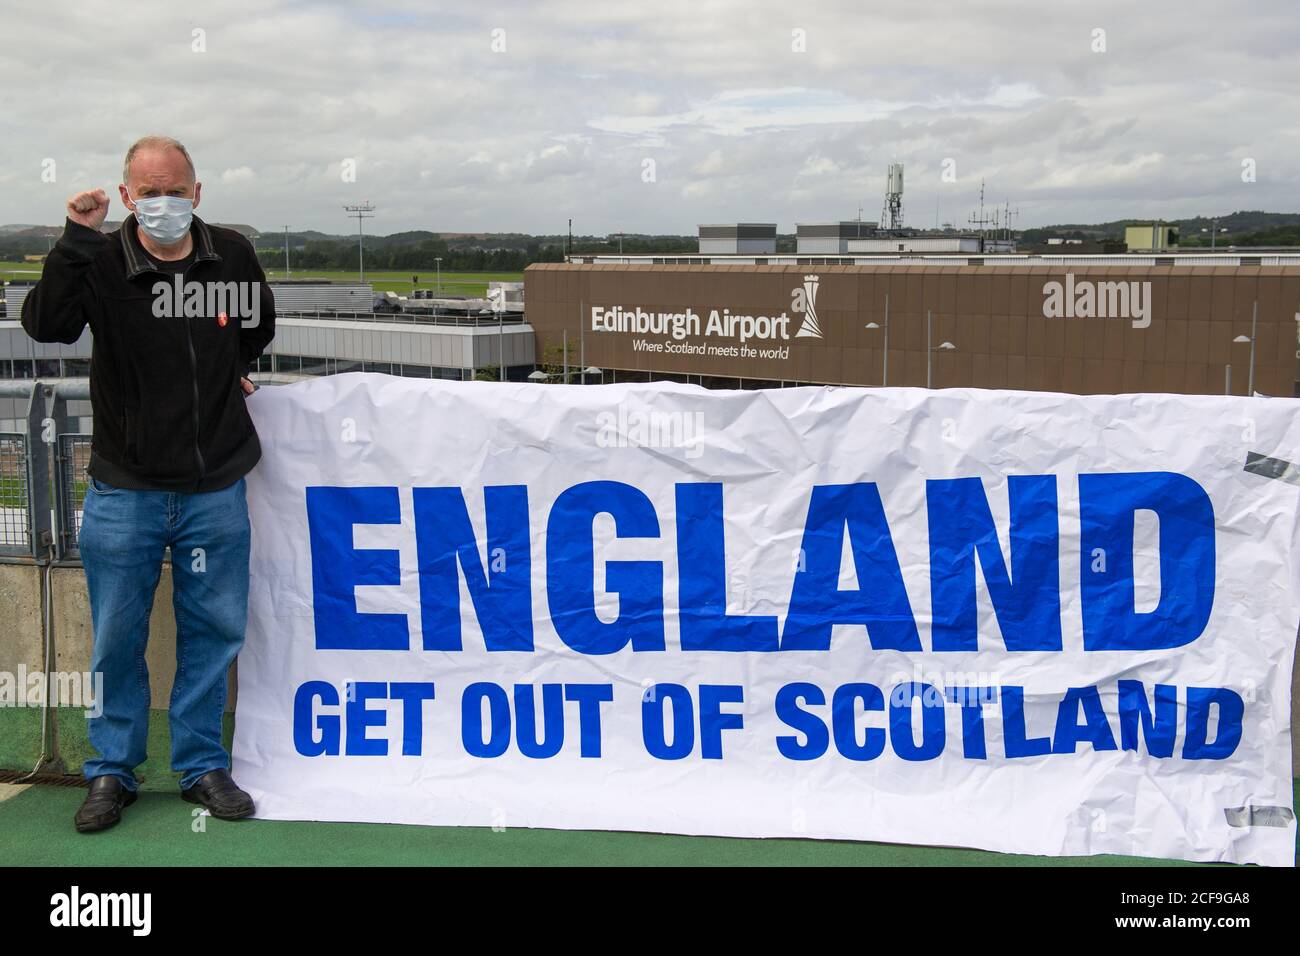 FILE PICS FROM 20 AUG 2020 Glasgow, Scotland, UK. 4 September 2020. Police Scotland arrested Sean Clerkin at 7.30am this morning at his Barrhead home. He was taken to Helen Street Police Station, Glasgow. PLEASE SEE ADDITIONAL INFO. Credit: Colin Fisher/Alamy Live News. Stock Photo